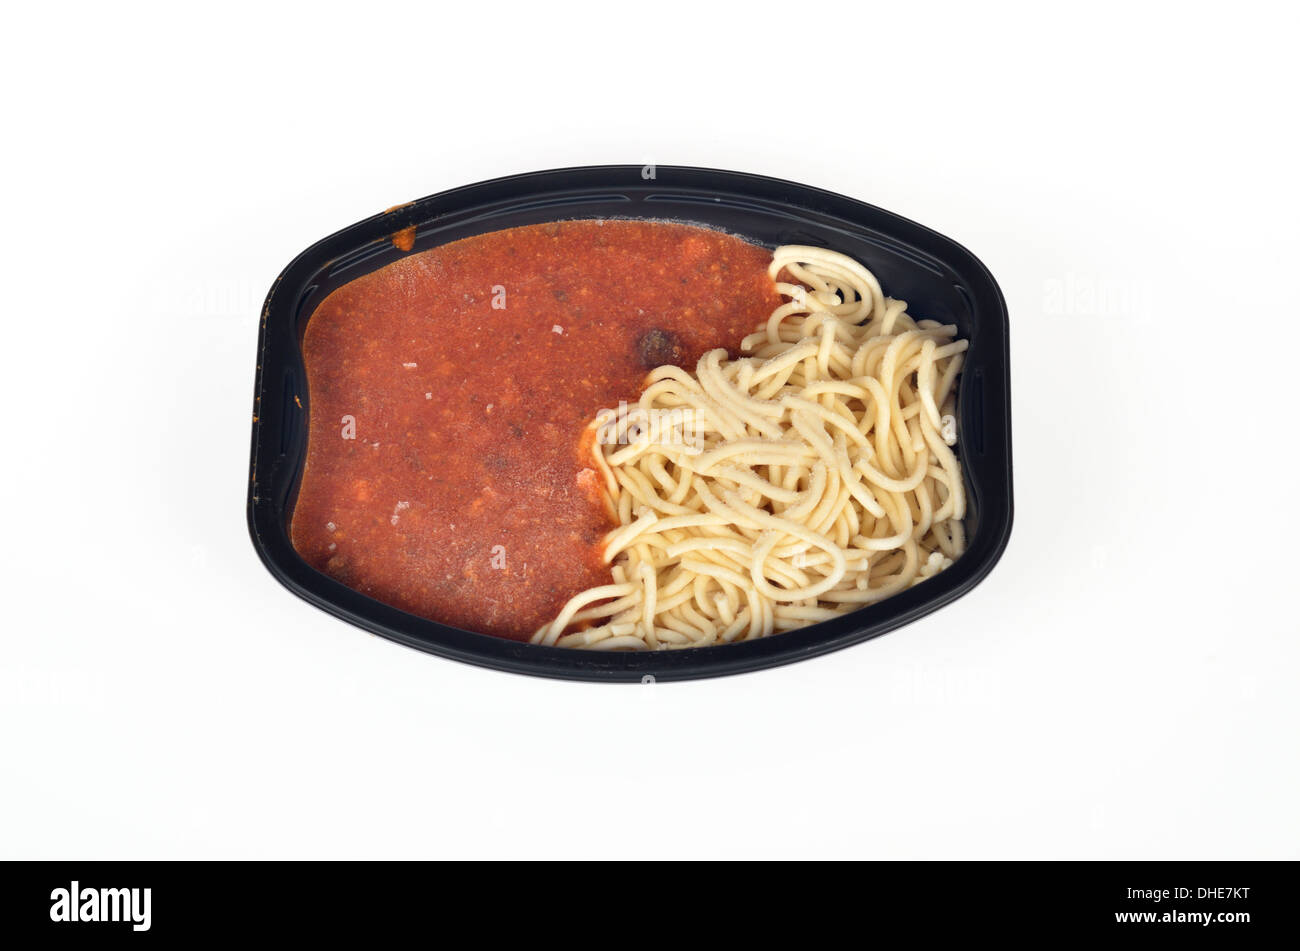 Frozen uncooked readymeal tray of spaghetti and meat sauce on white background, cutout. Stock Photo